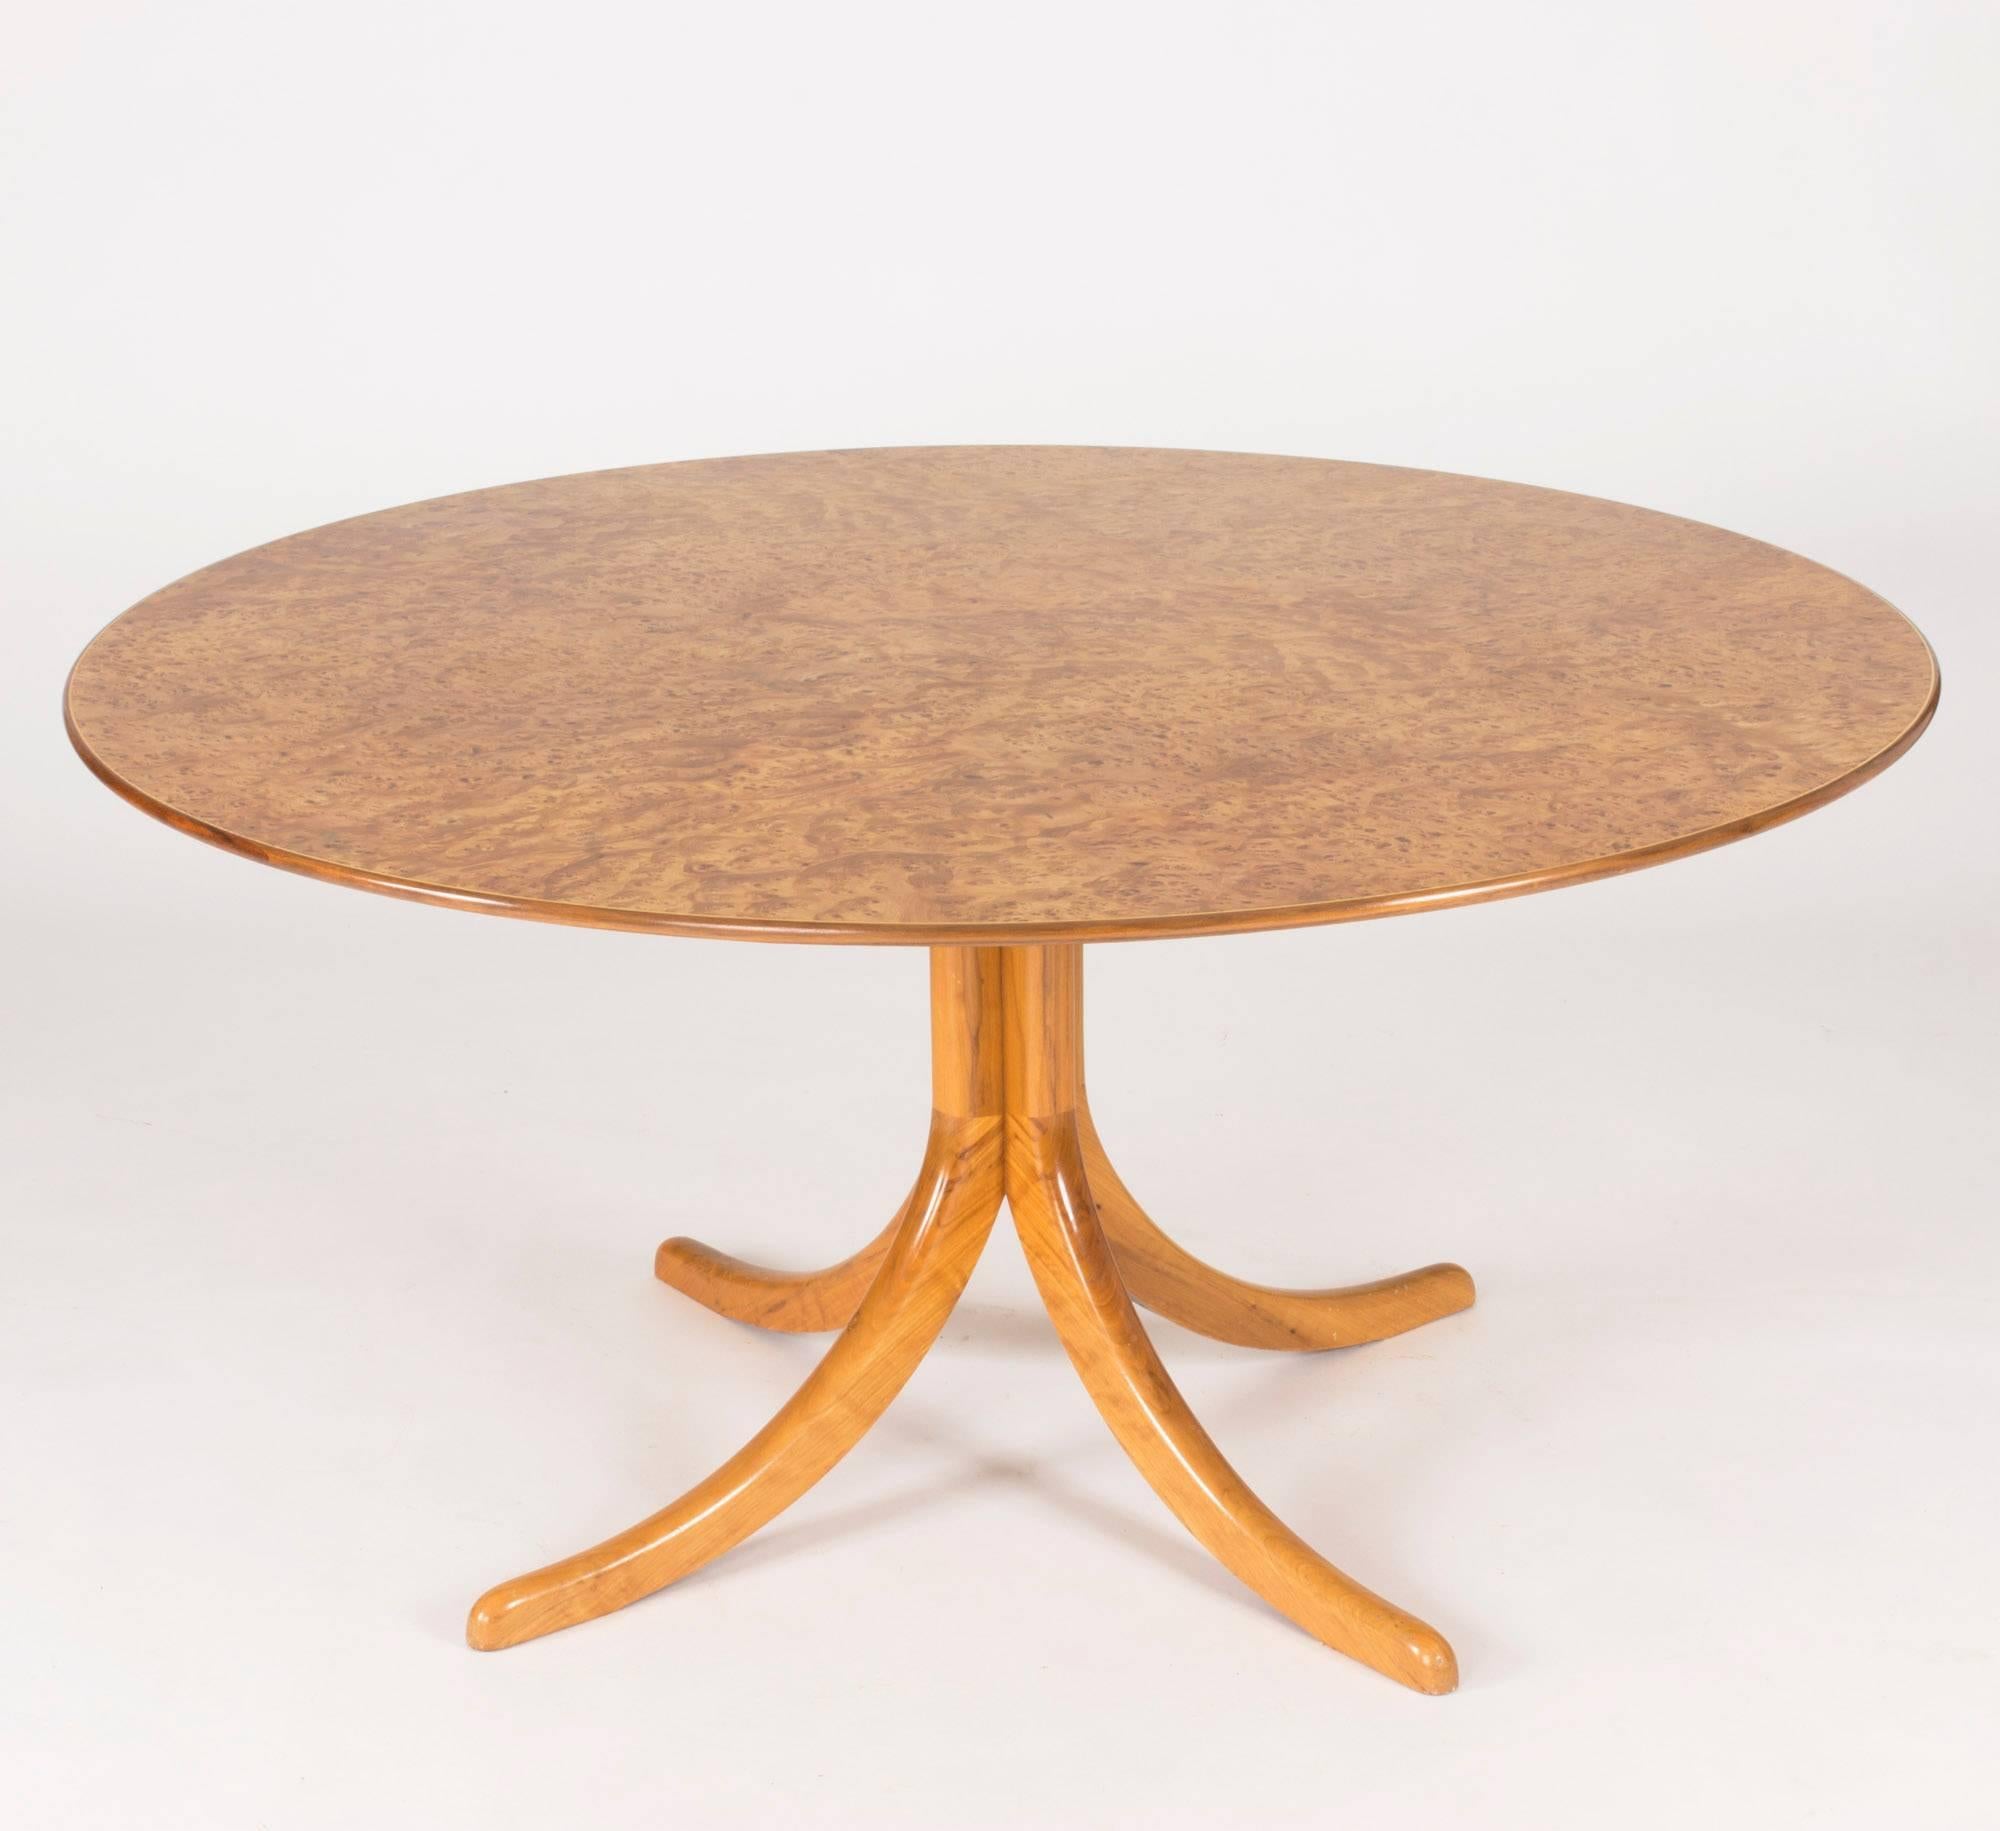 Stunning dining table by Josef Frank with a mesmerizing alder root tabletop in beautiful condition. The pattern seems to move and whirl like water in a stream, giving it life and endless variation. Pedestal base with four feet.